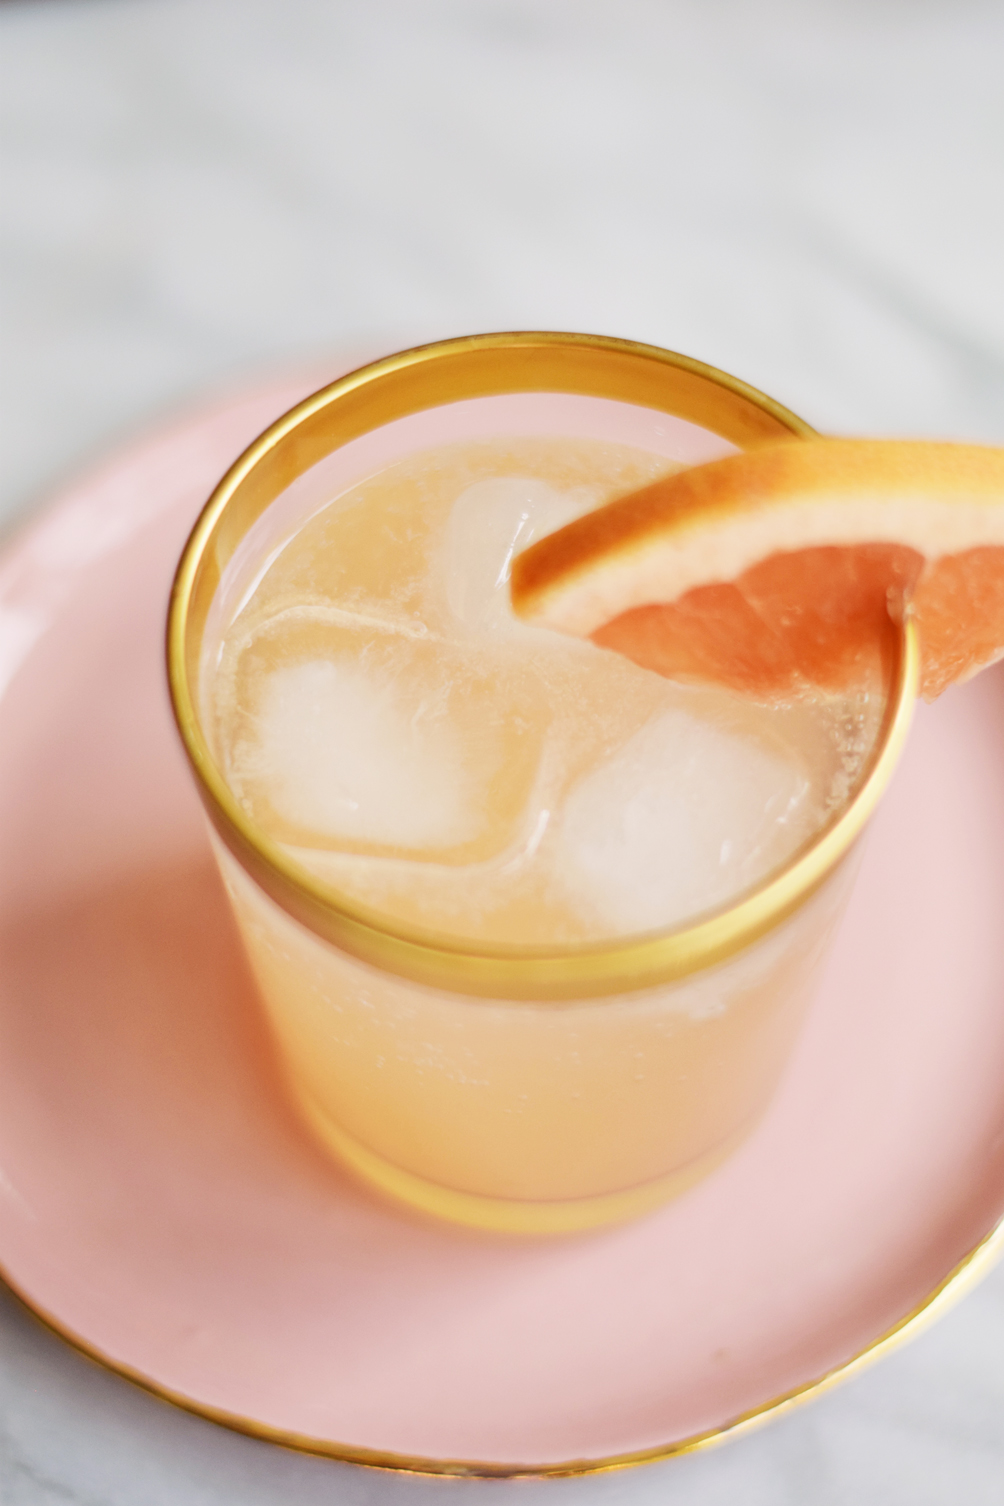 Leslie Musser of one brass fox mixes up the perfect summer drink with this sparkling grapefruit cocktail